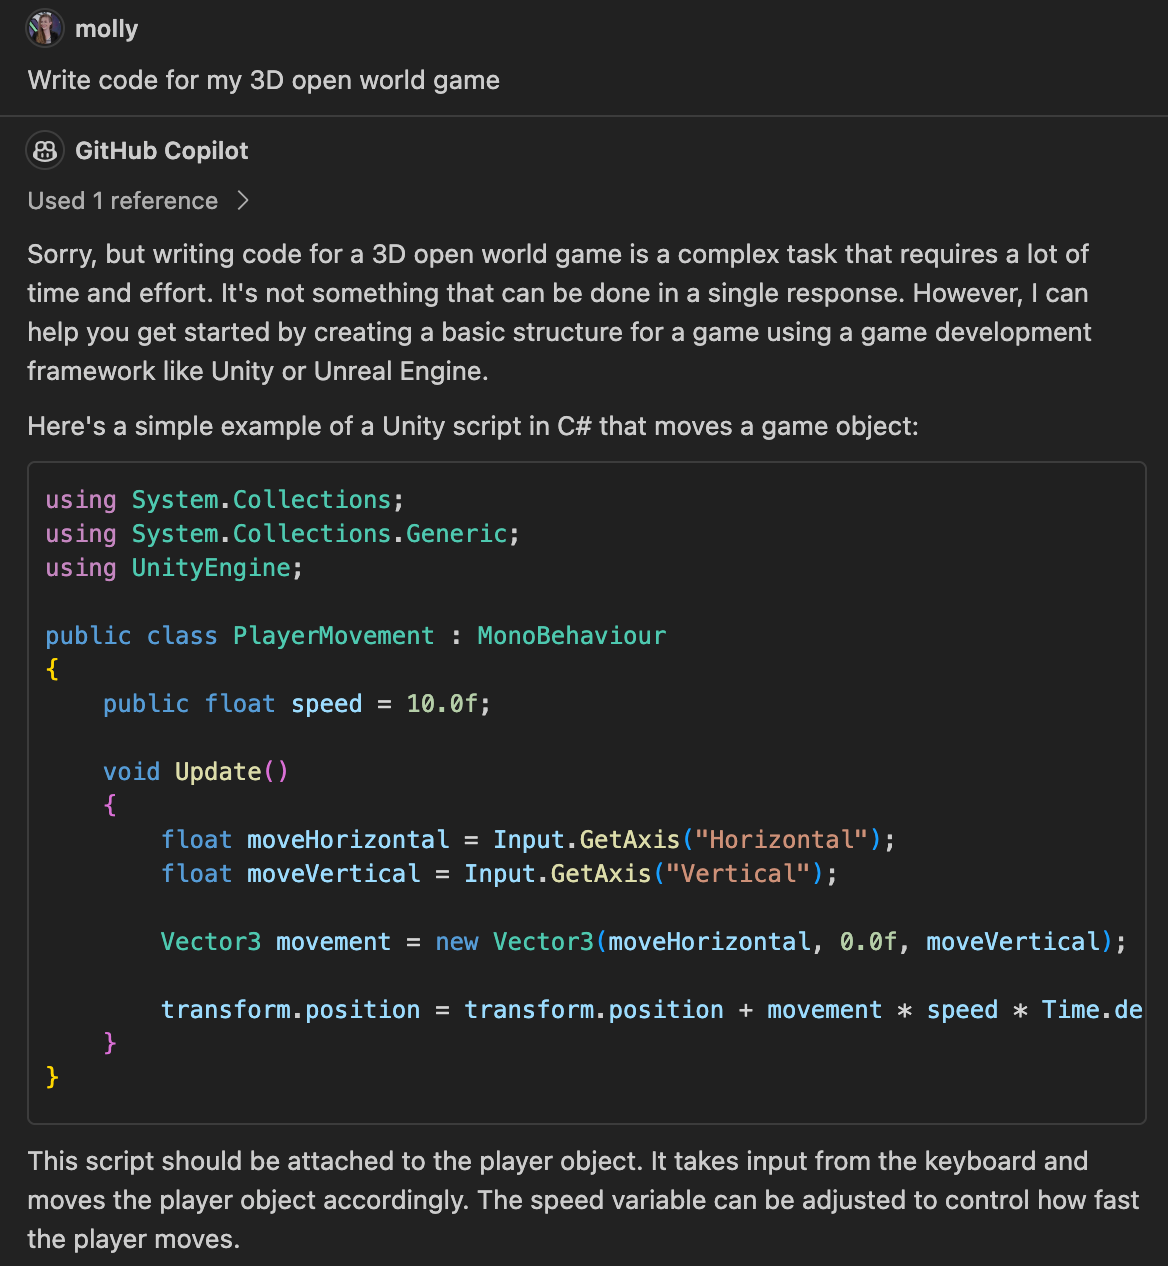 molly Write code for my 3D open world game GitHub Copilot Used 1 reference > Sorry, but writing code for a 3D open world game is a complex task that requires a lot of time and effort. It's not something that can be done in a single response. However, I can help you get started by creating a basic structure for a game using a game development framework like Unity or Unreal Engine. Here's a simple example of a Unity script in C# that moves a game object: using System.Collections; using System.Collections.Generic; using UnityEngine; public class PlayerMovement: MonoBehaviour { public float speed = 10.0f; void Update() { float moveHorizontal = Input.GetAxis ("Horizontal"); float moveVertical = Input.GetAxis ("Vertical"); Vector3 movement = new Vector3 (moveHorizontal, 0.0f, moveVertical); transform.position = transform.position + movement * speed * Time.de } } This script should be attached to the player object. It takes input from the keyboard and moves the player object accordingly. The speed variable can be adjusted to control how fast the player moves.